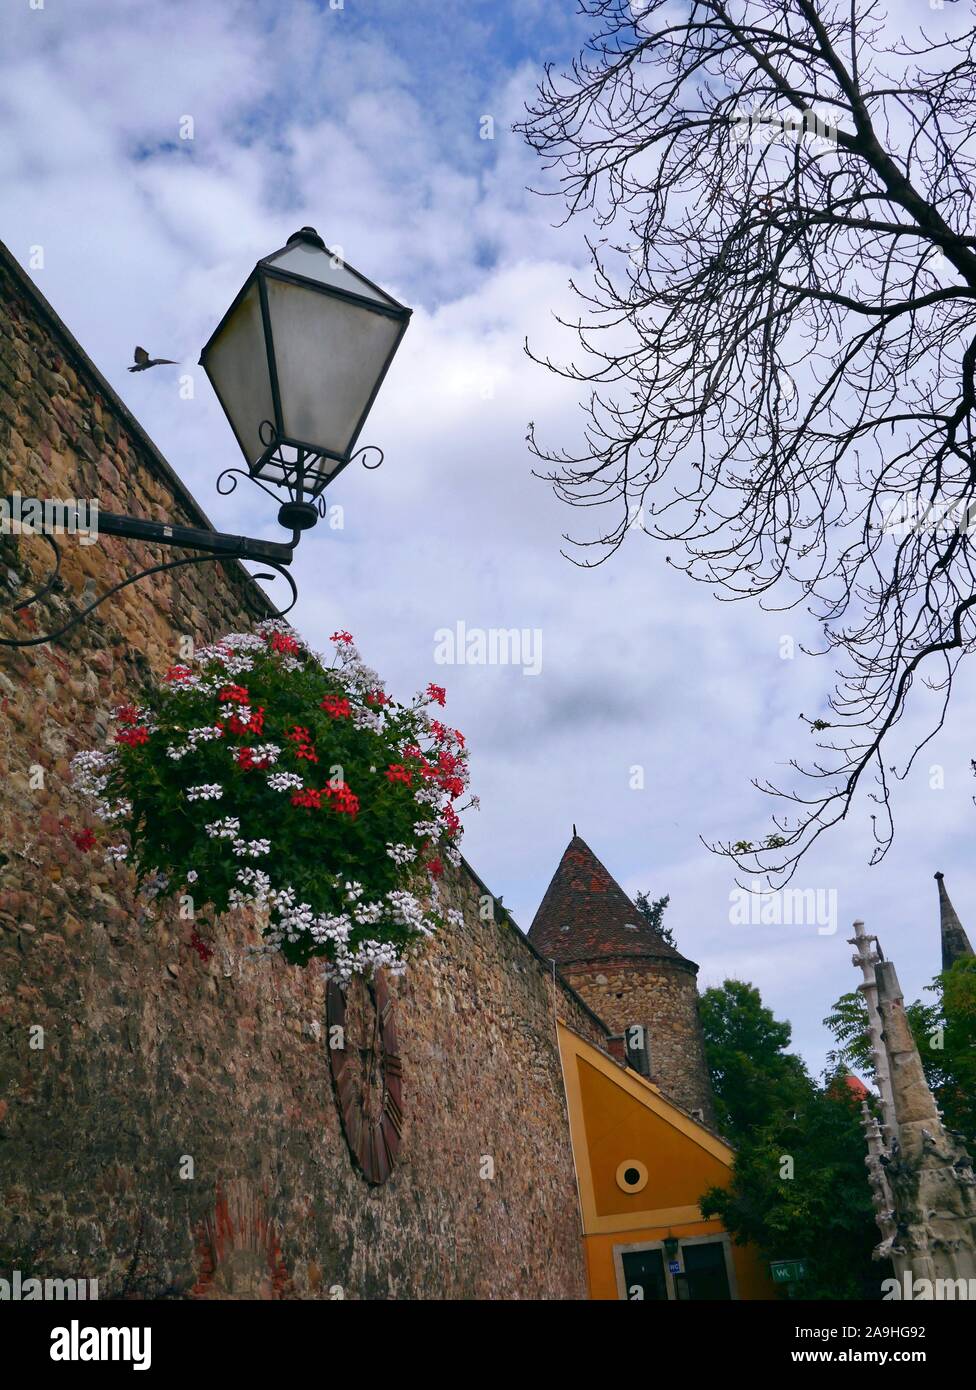 Flower pot hanging from a lamp and old clock on the wall, Zagreb, Croatia Stock Photo